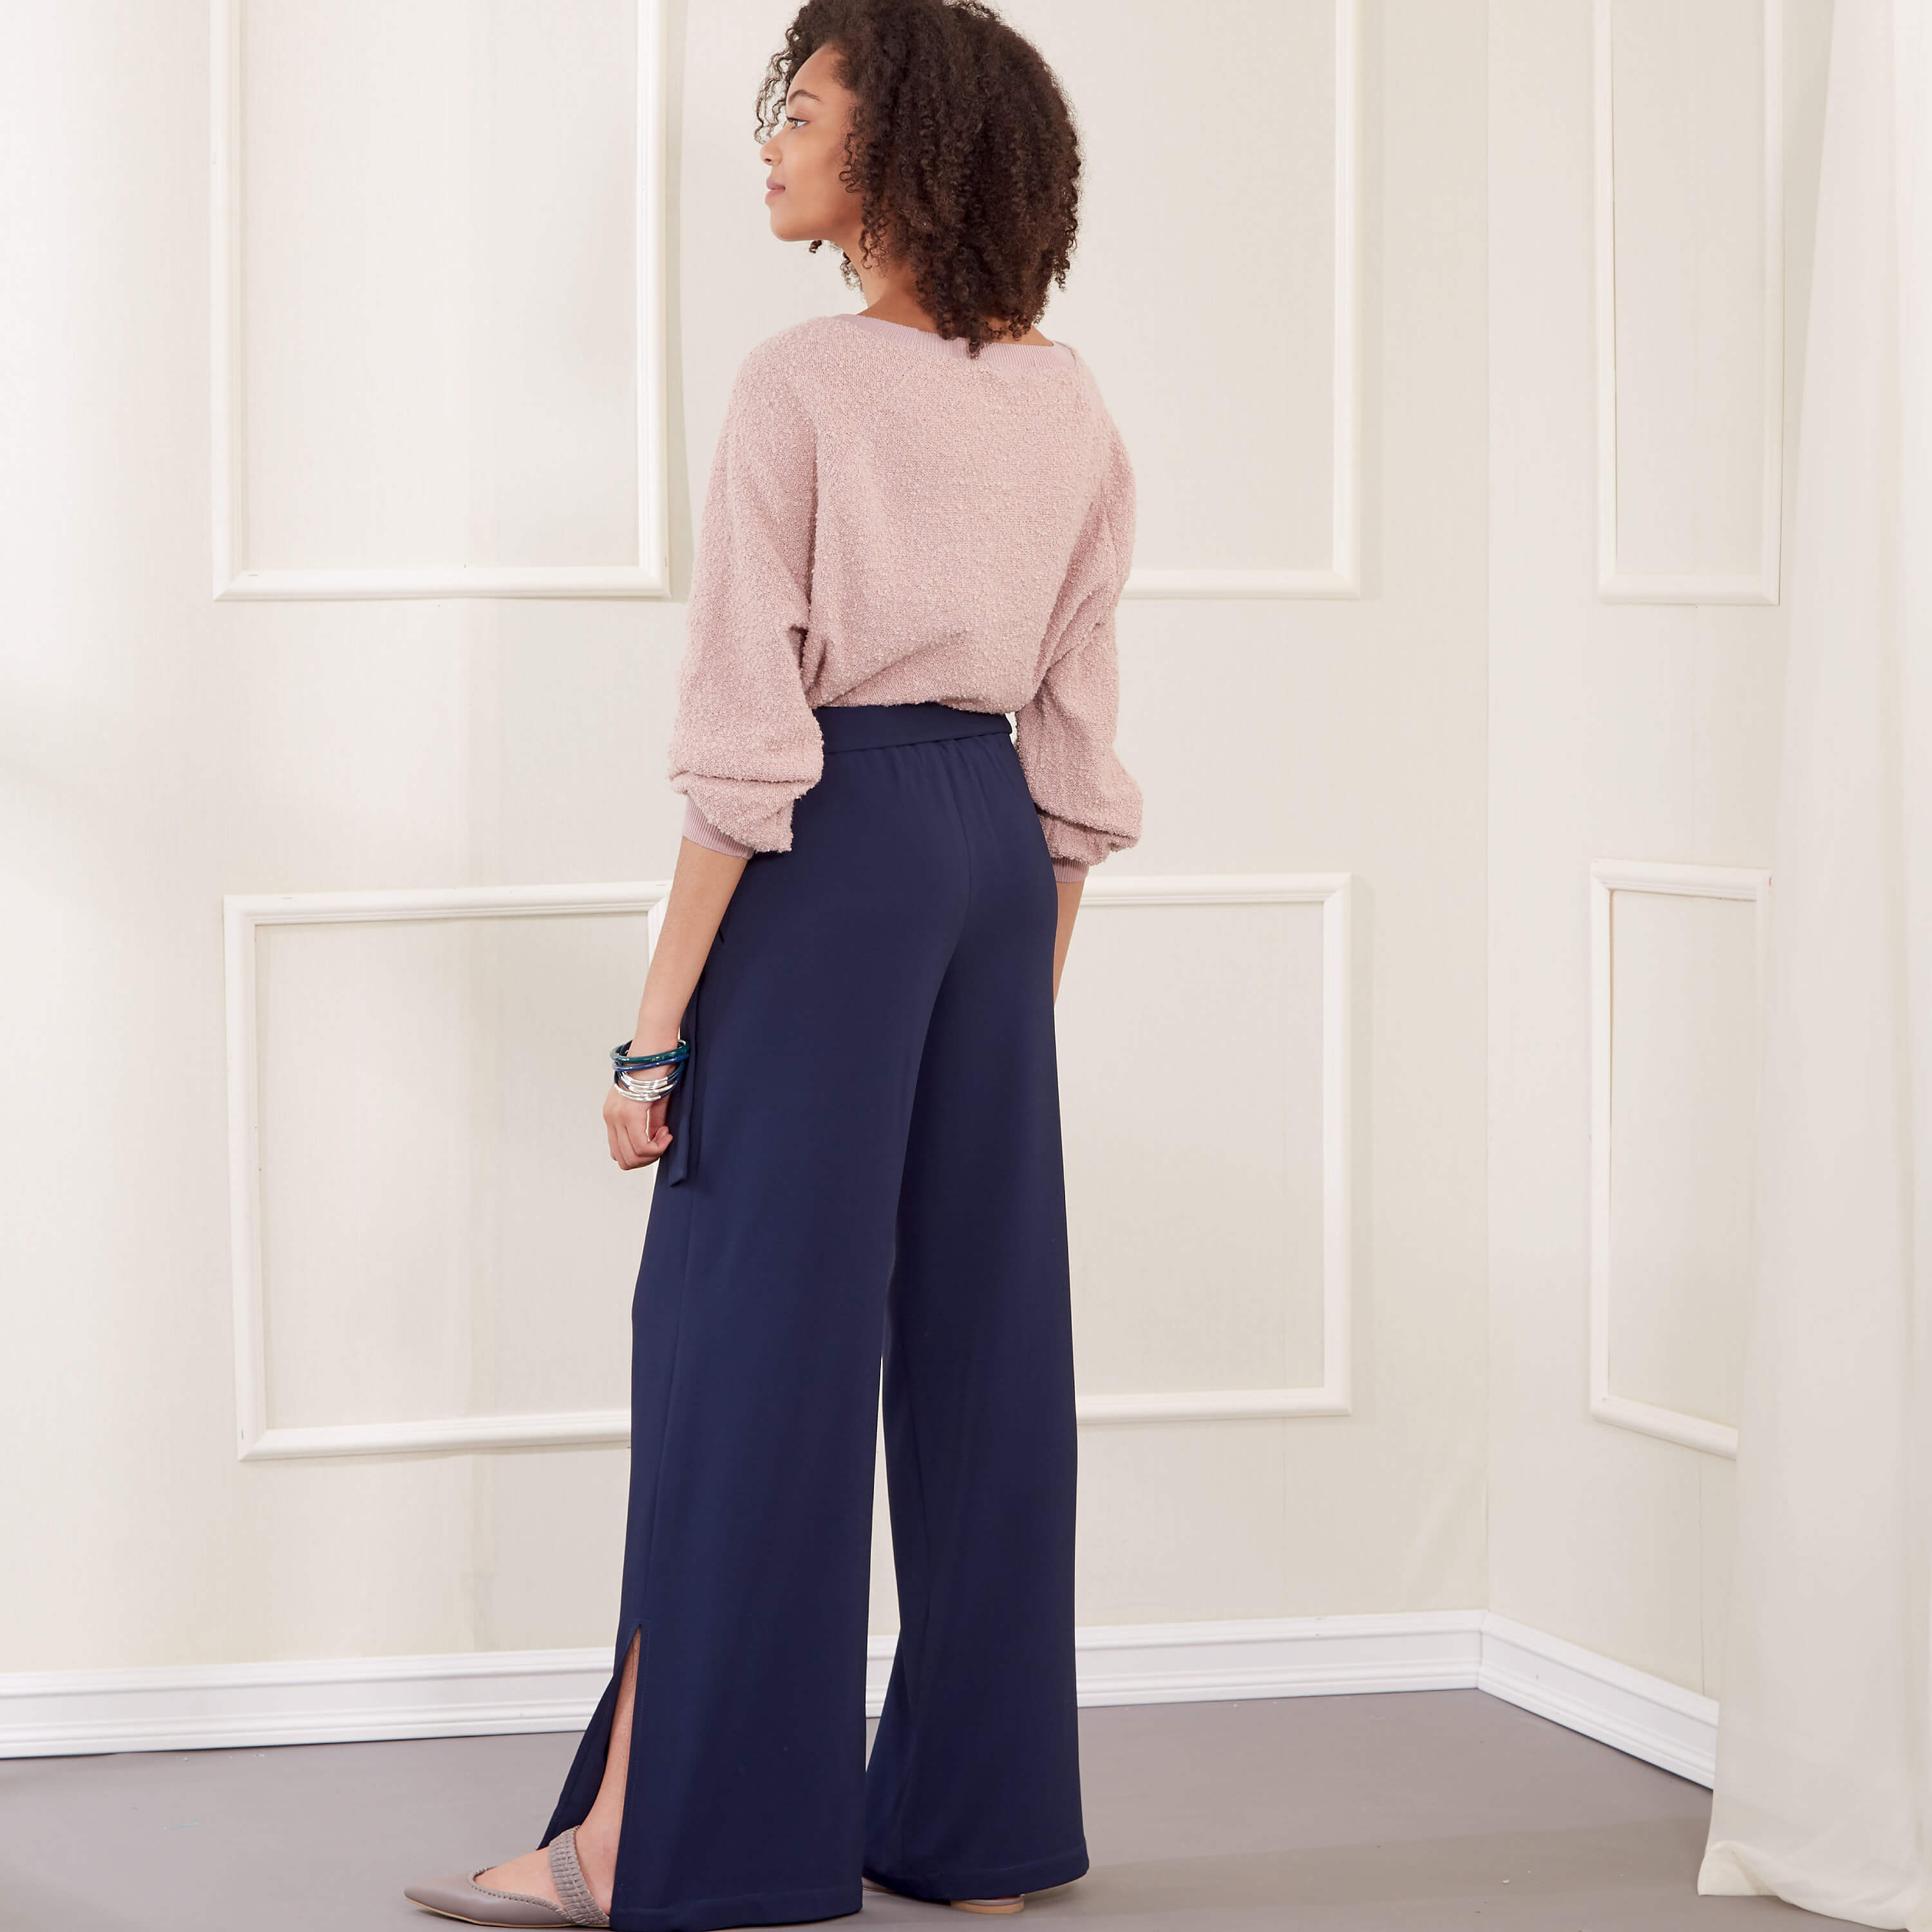 New Look Sewing Pattern N6691 Misses'Trousers straight or flared leg.